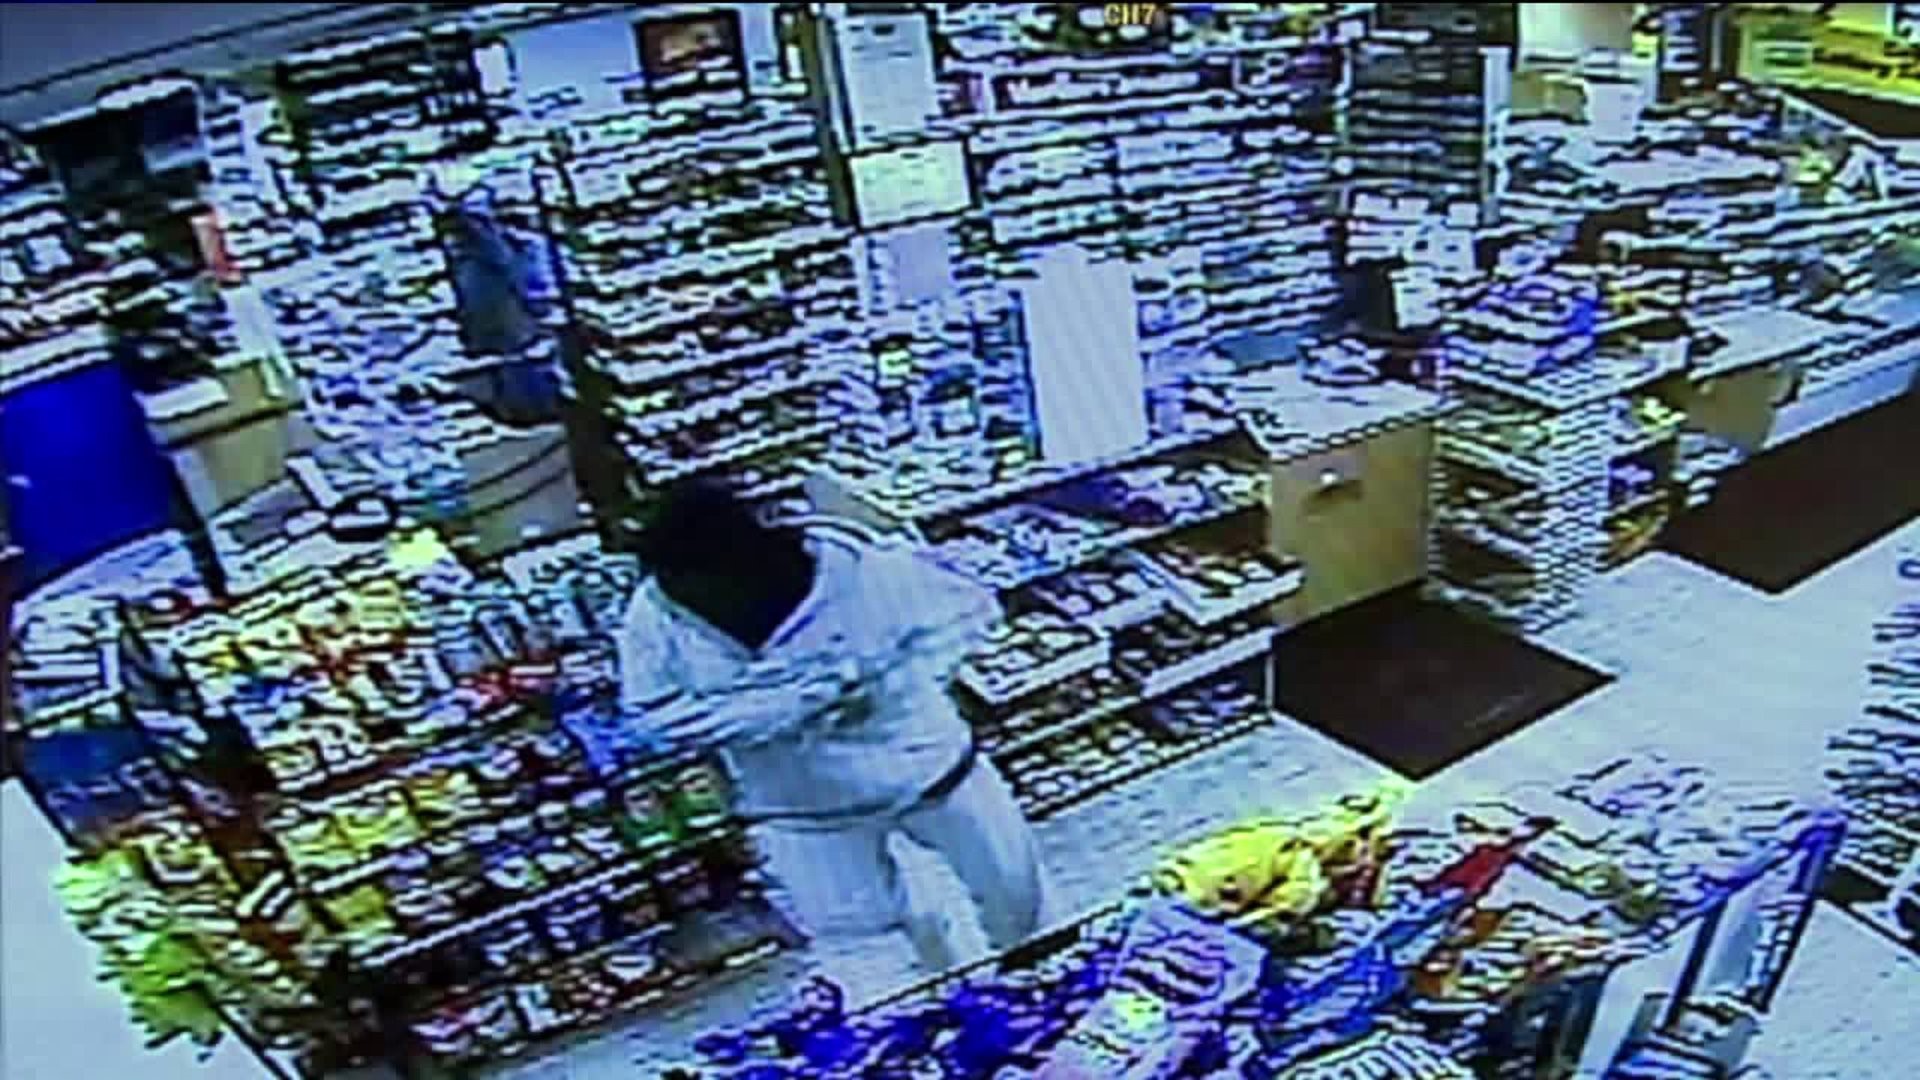 Convenient Robbed in Kingston